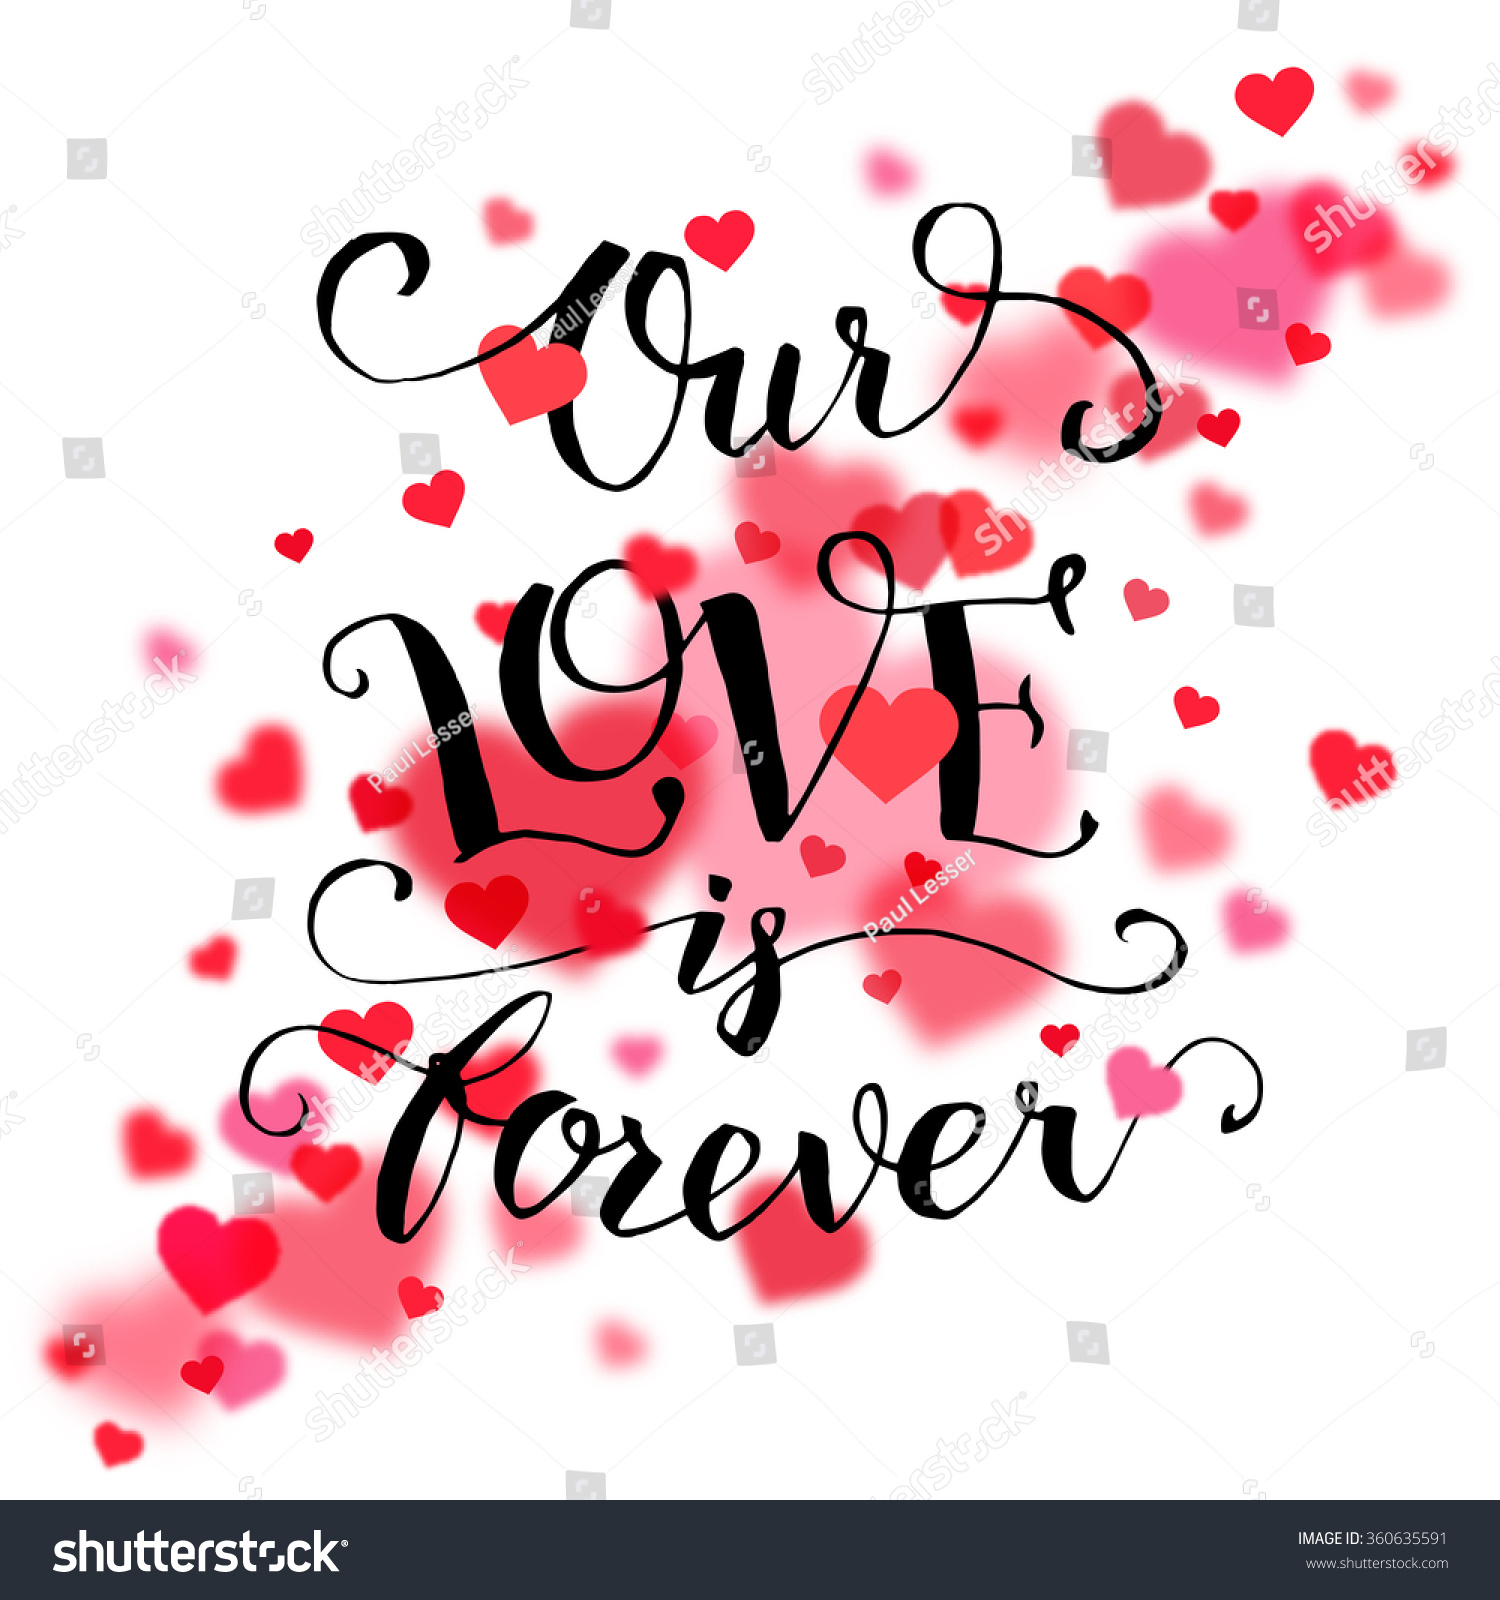 Our love is forever Calligraphy quote handwritten text Valentine s day or wedding typography